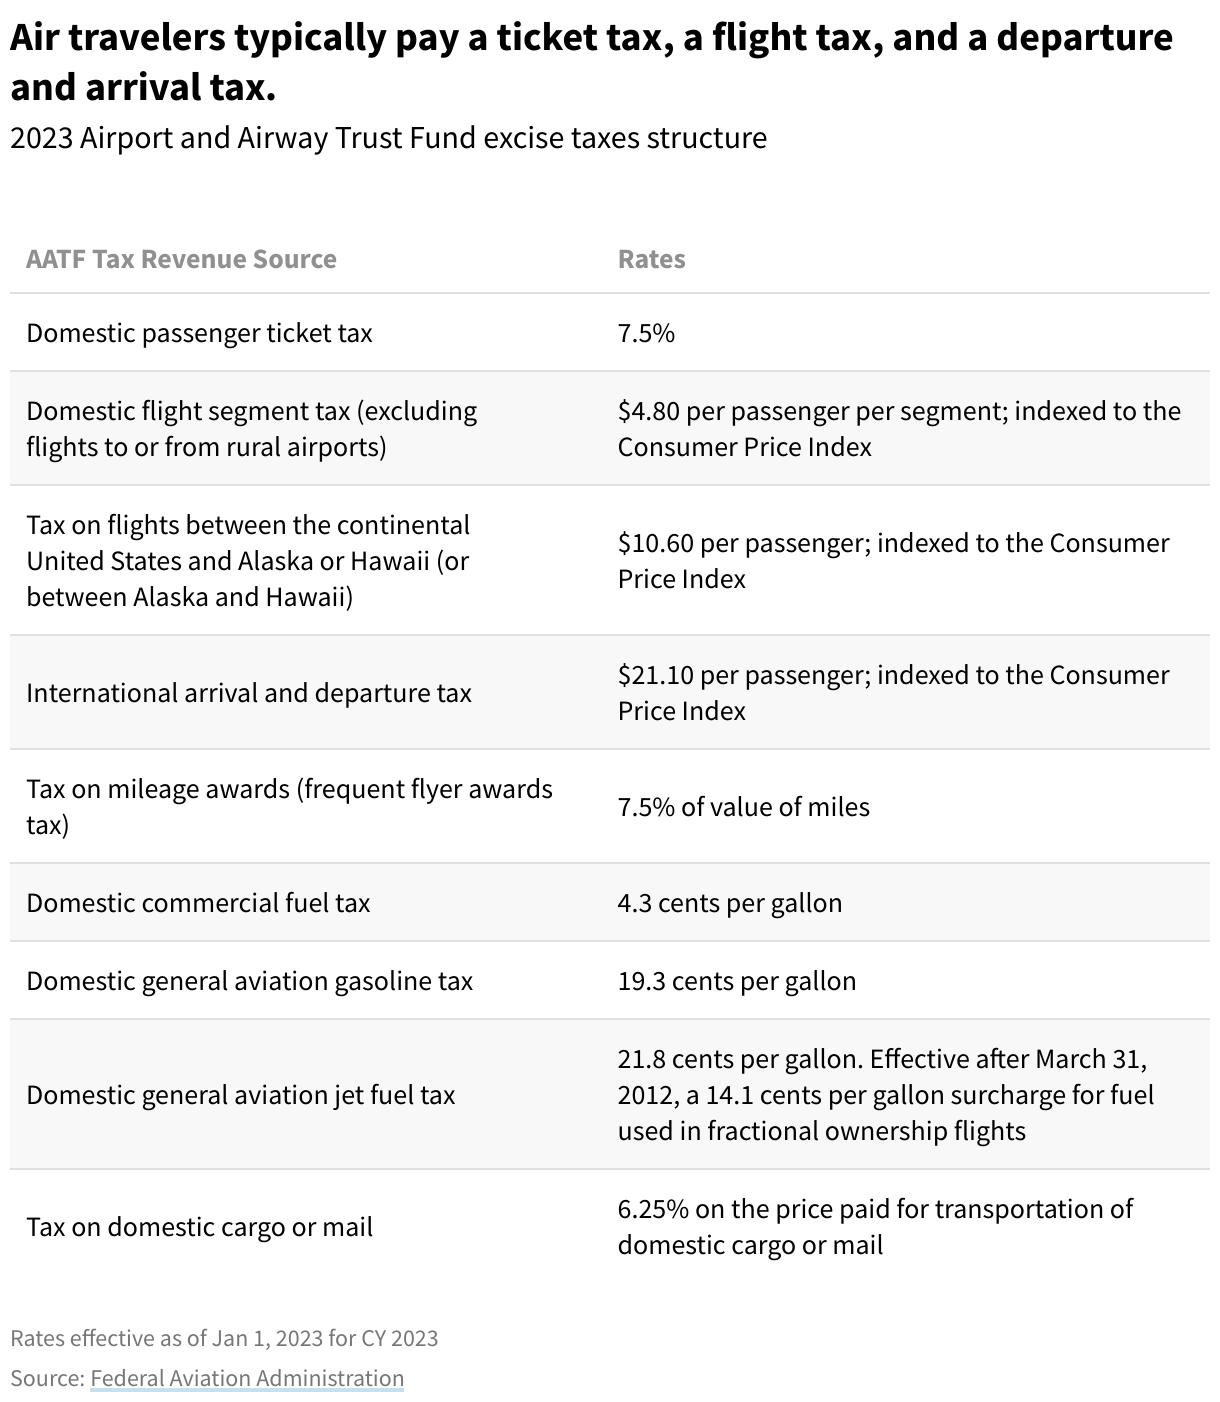 Table showing the 2023 Airport and Airway Trust Fund Excise Taxes Structure